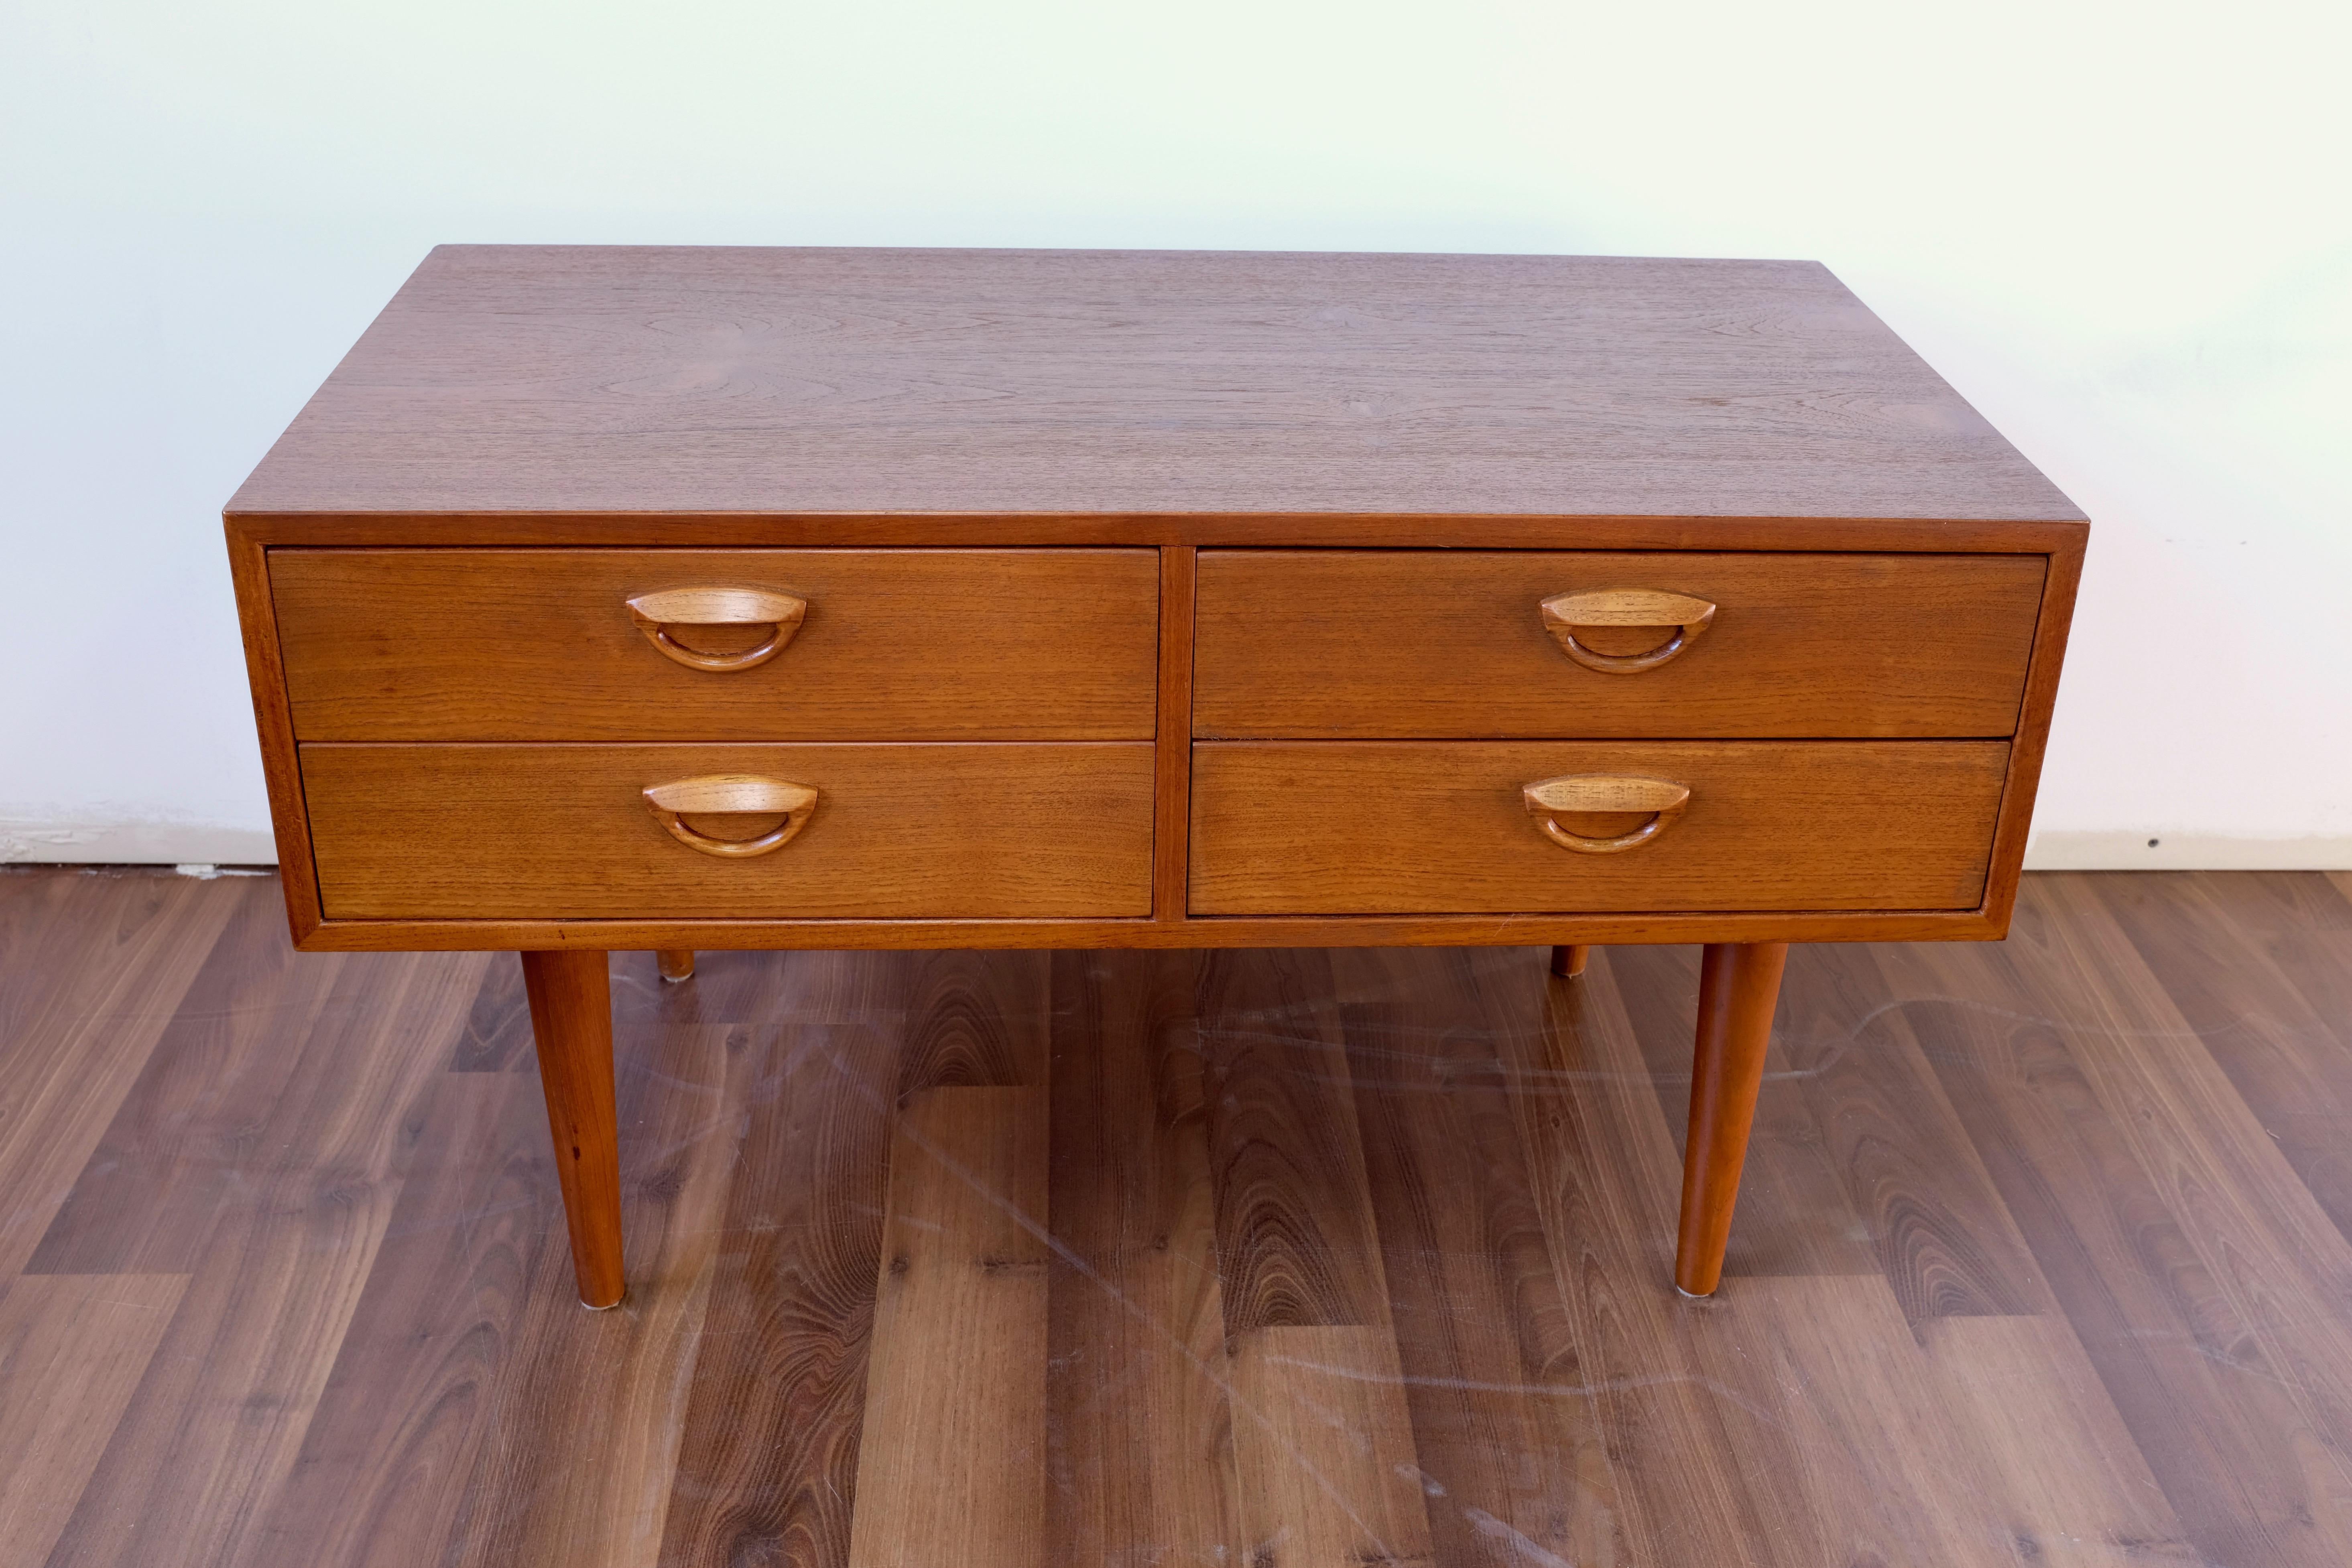 Kai Kristiansen Low Teak Dresser with 4 Drawers In Excellent Condition For Sale In Ottawa, ON